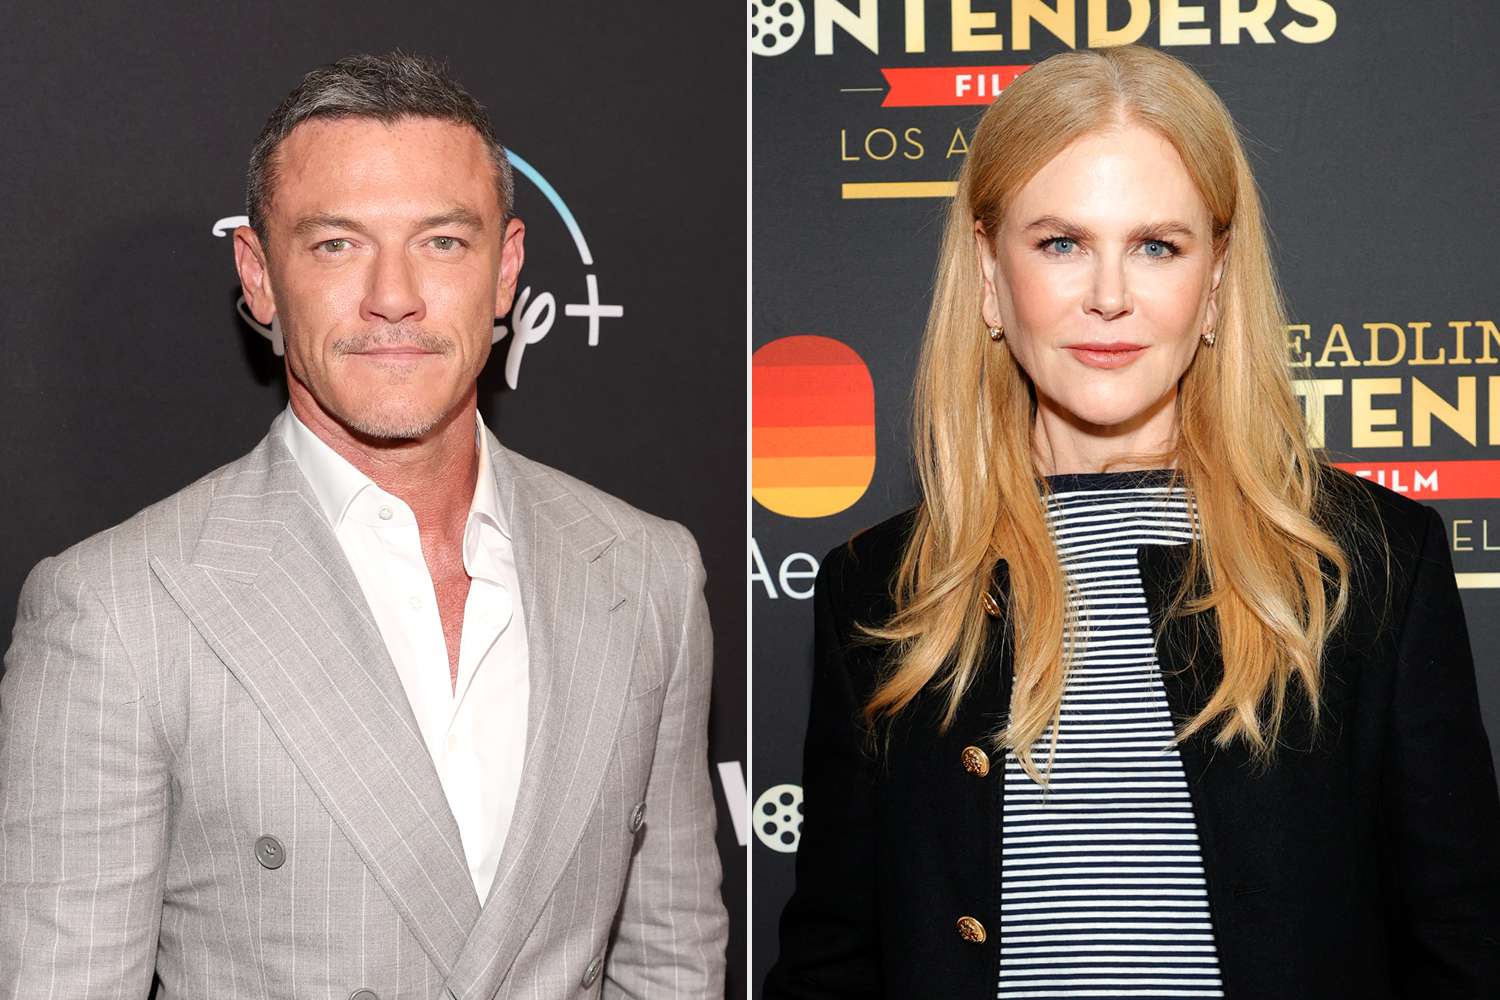 Luke Evans and Nicole Kidman have released a duet